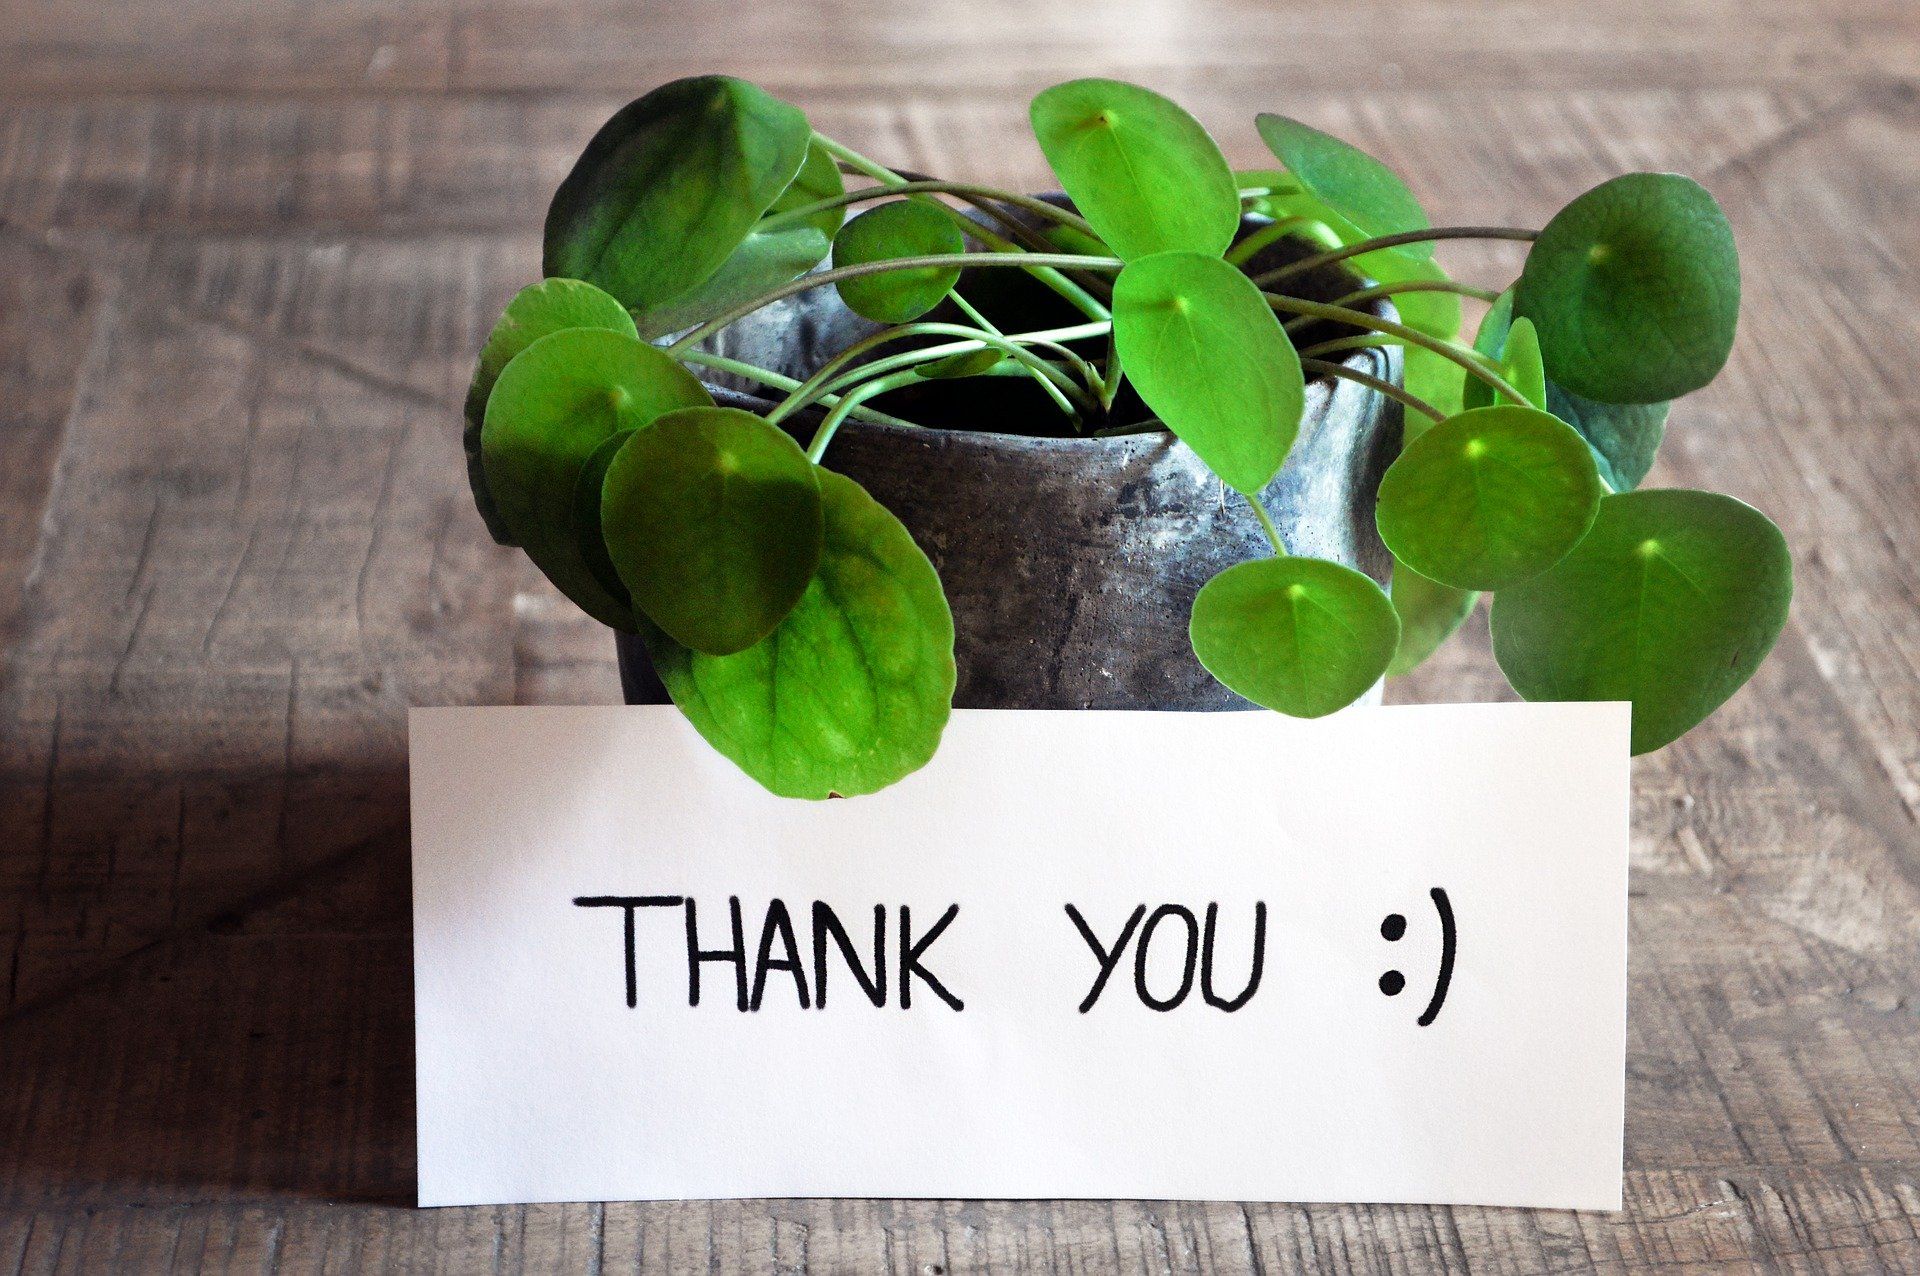 Pot plant with a thank you card